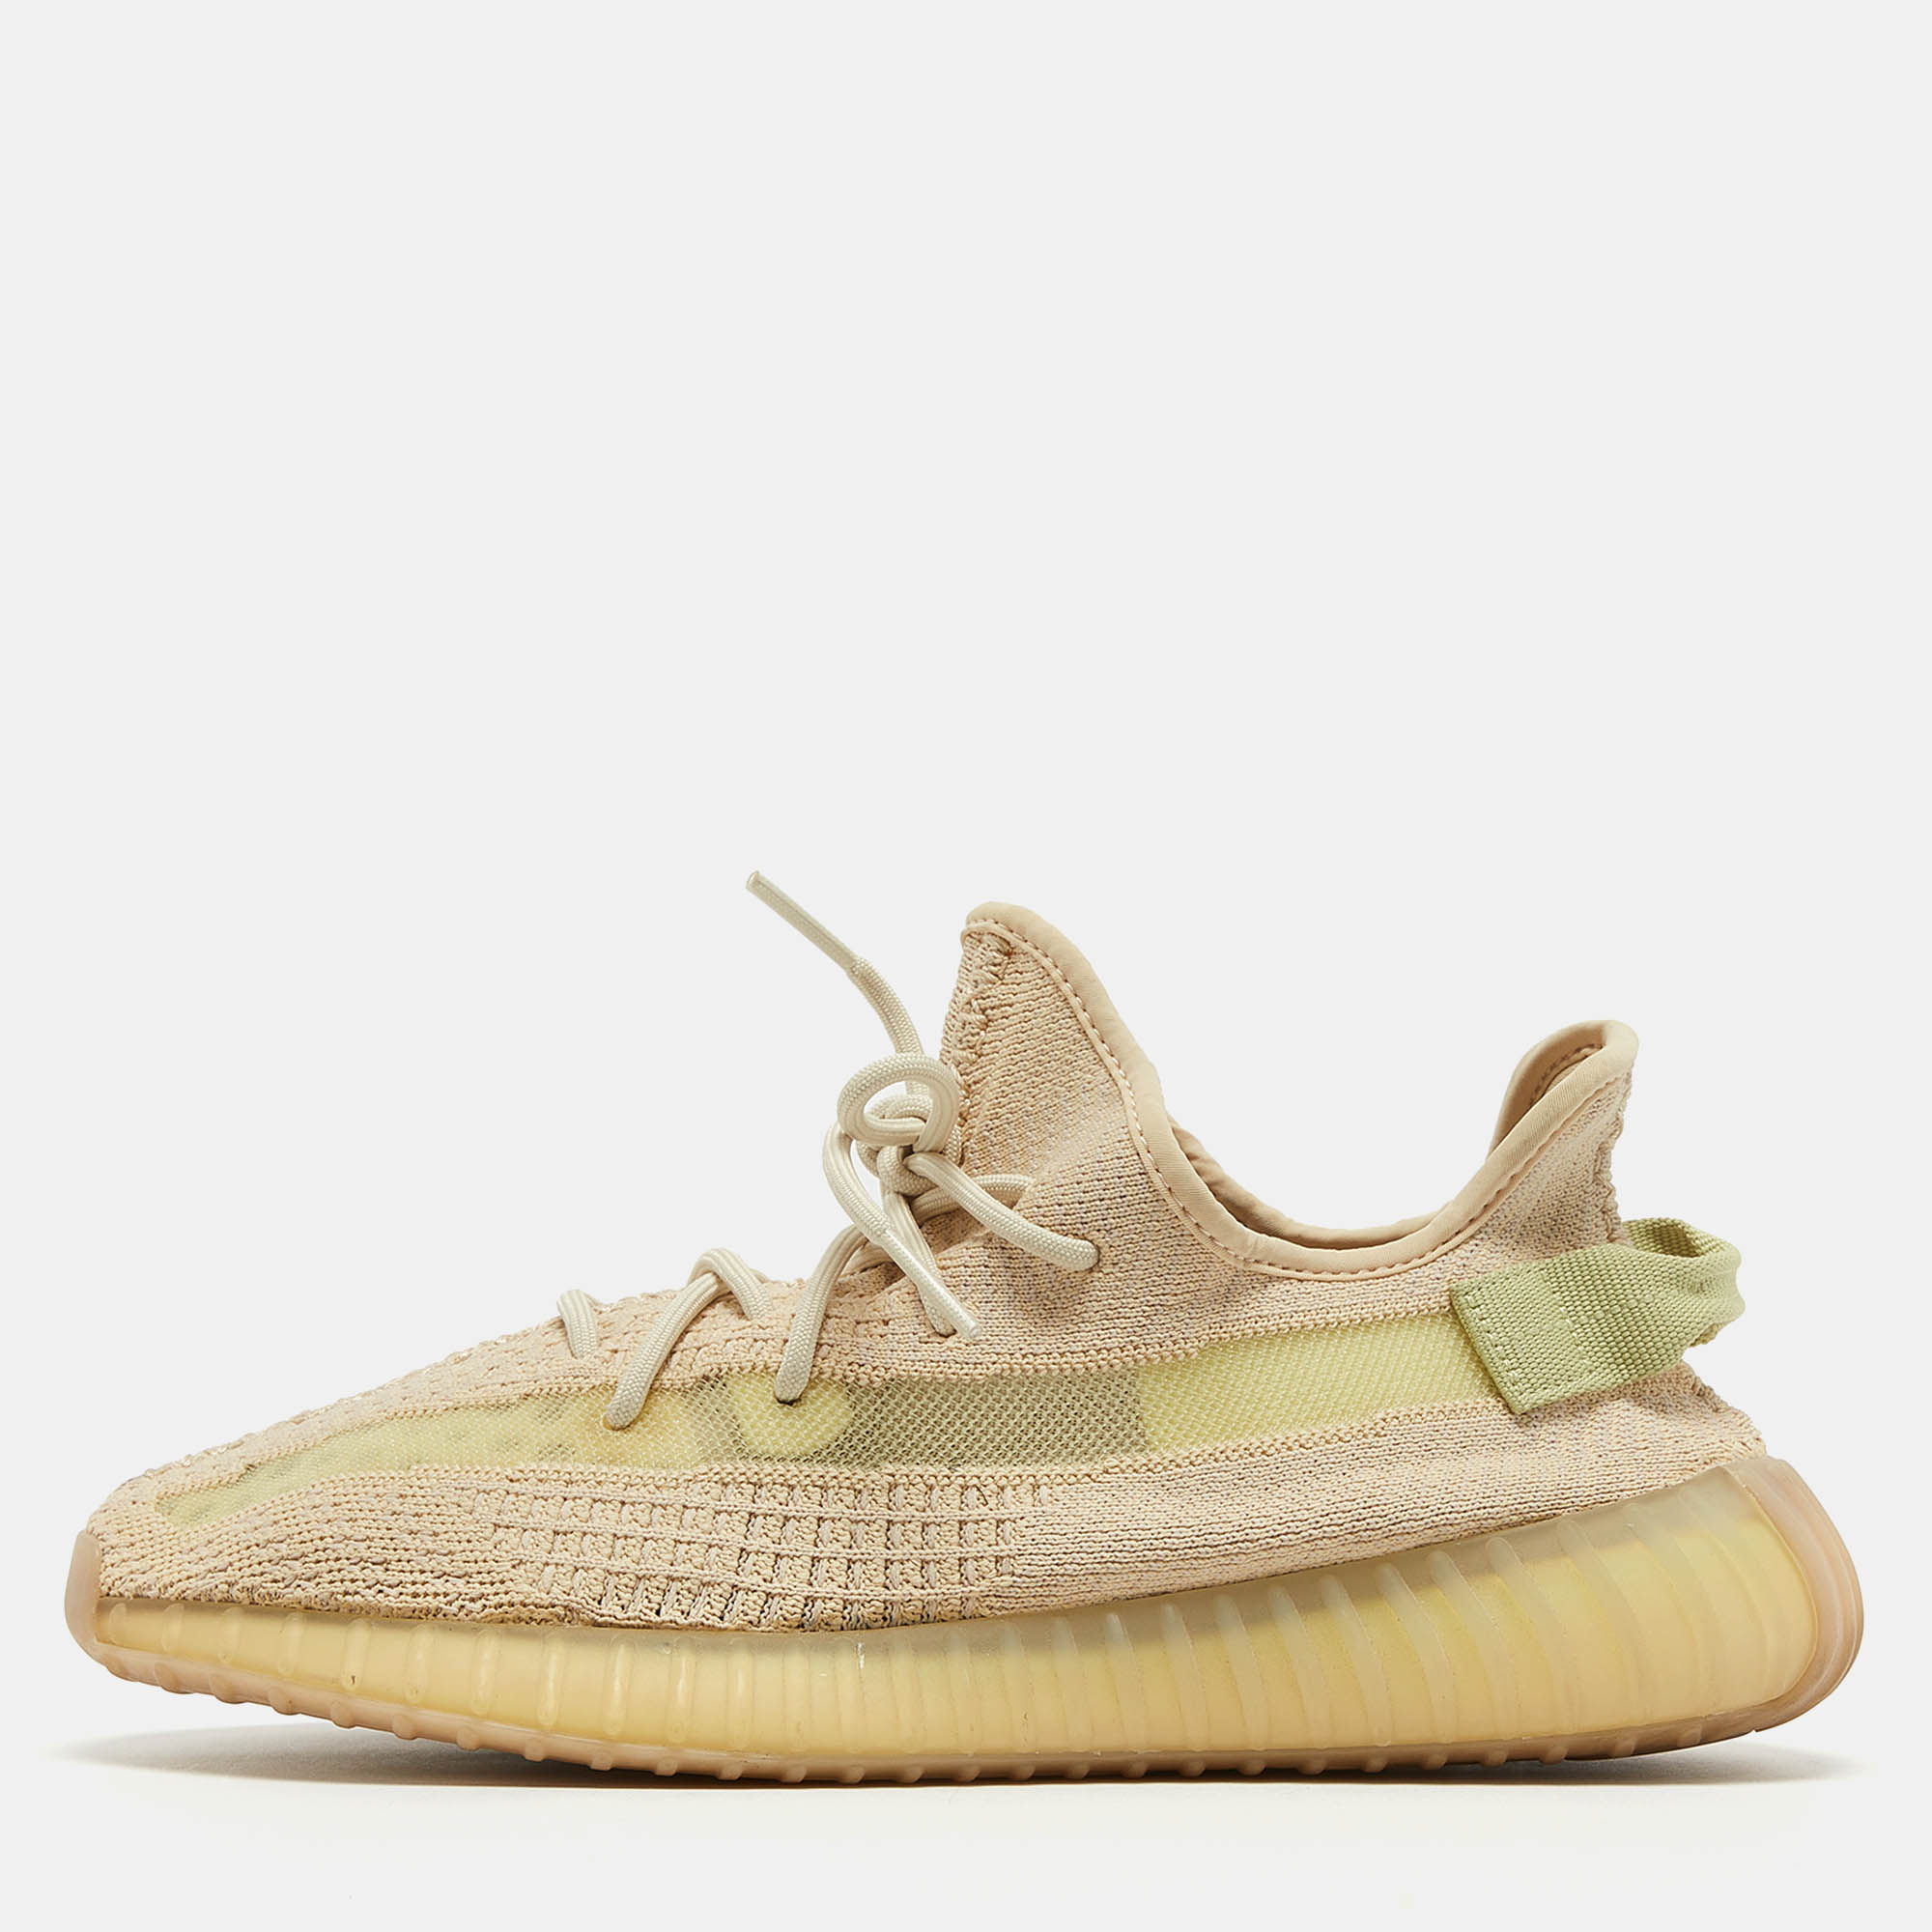 Catch on with the trend of designs from the Yeezy x Adidas collaboration with this pair of Boost 350 V2 sneakers. The knit fabric pair features great cushioning lace ups on the vamps and tough rubber soles. This pair comes in light yellow shade for a greater impact.